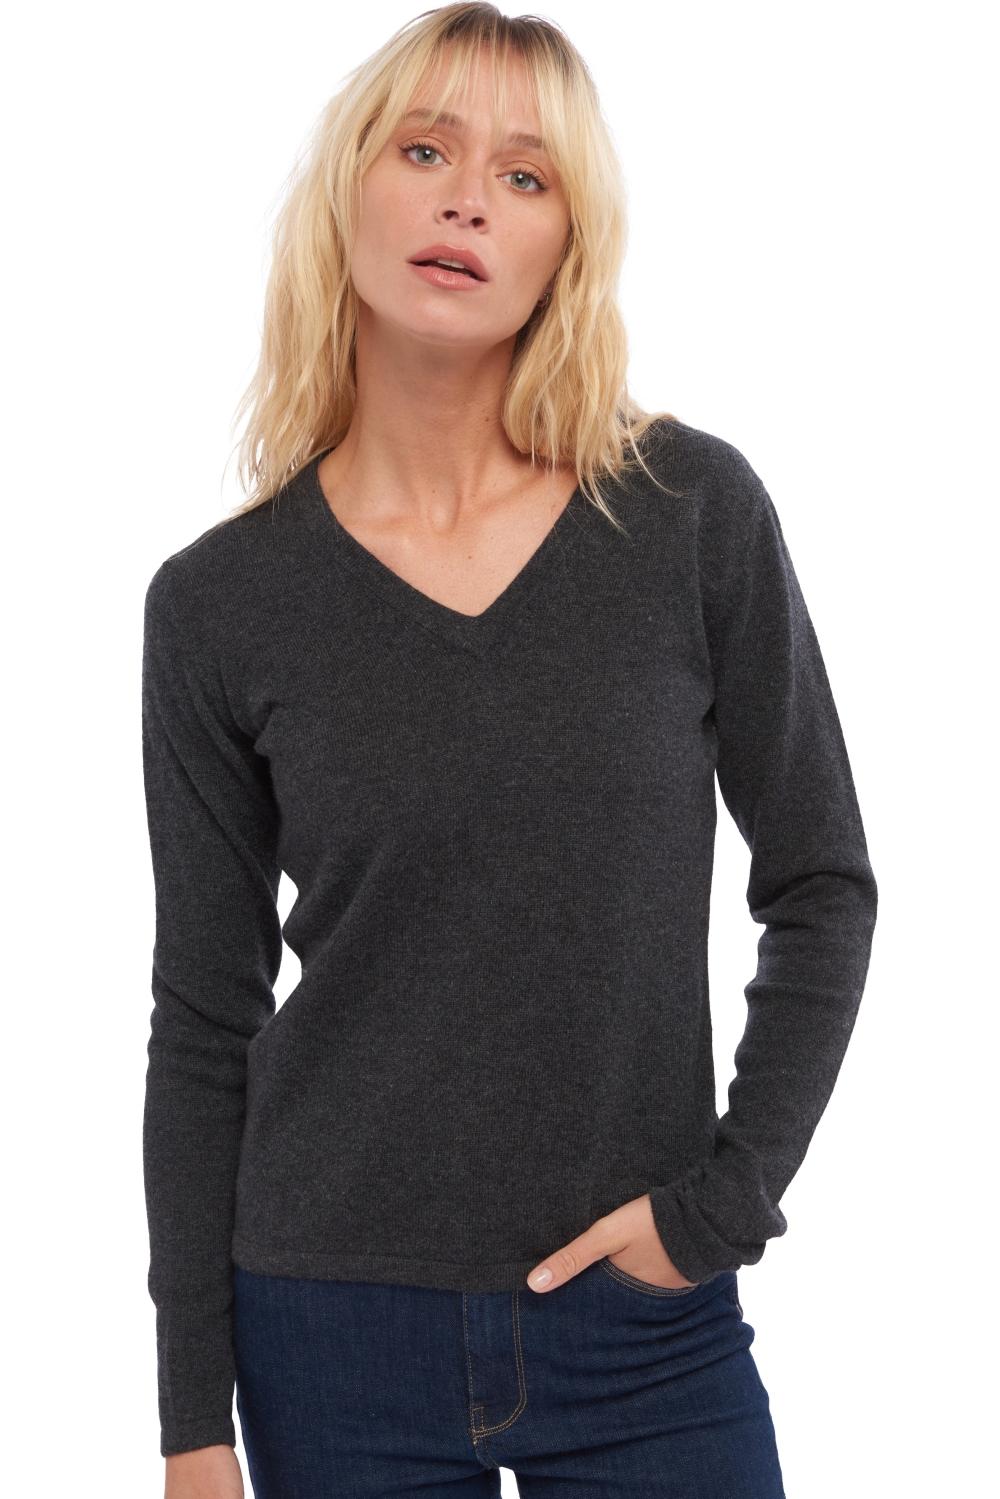 Cashmere ladies spring summer collection emma charcoal marl 3xl